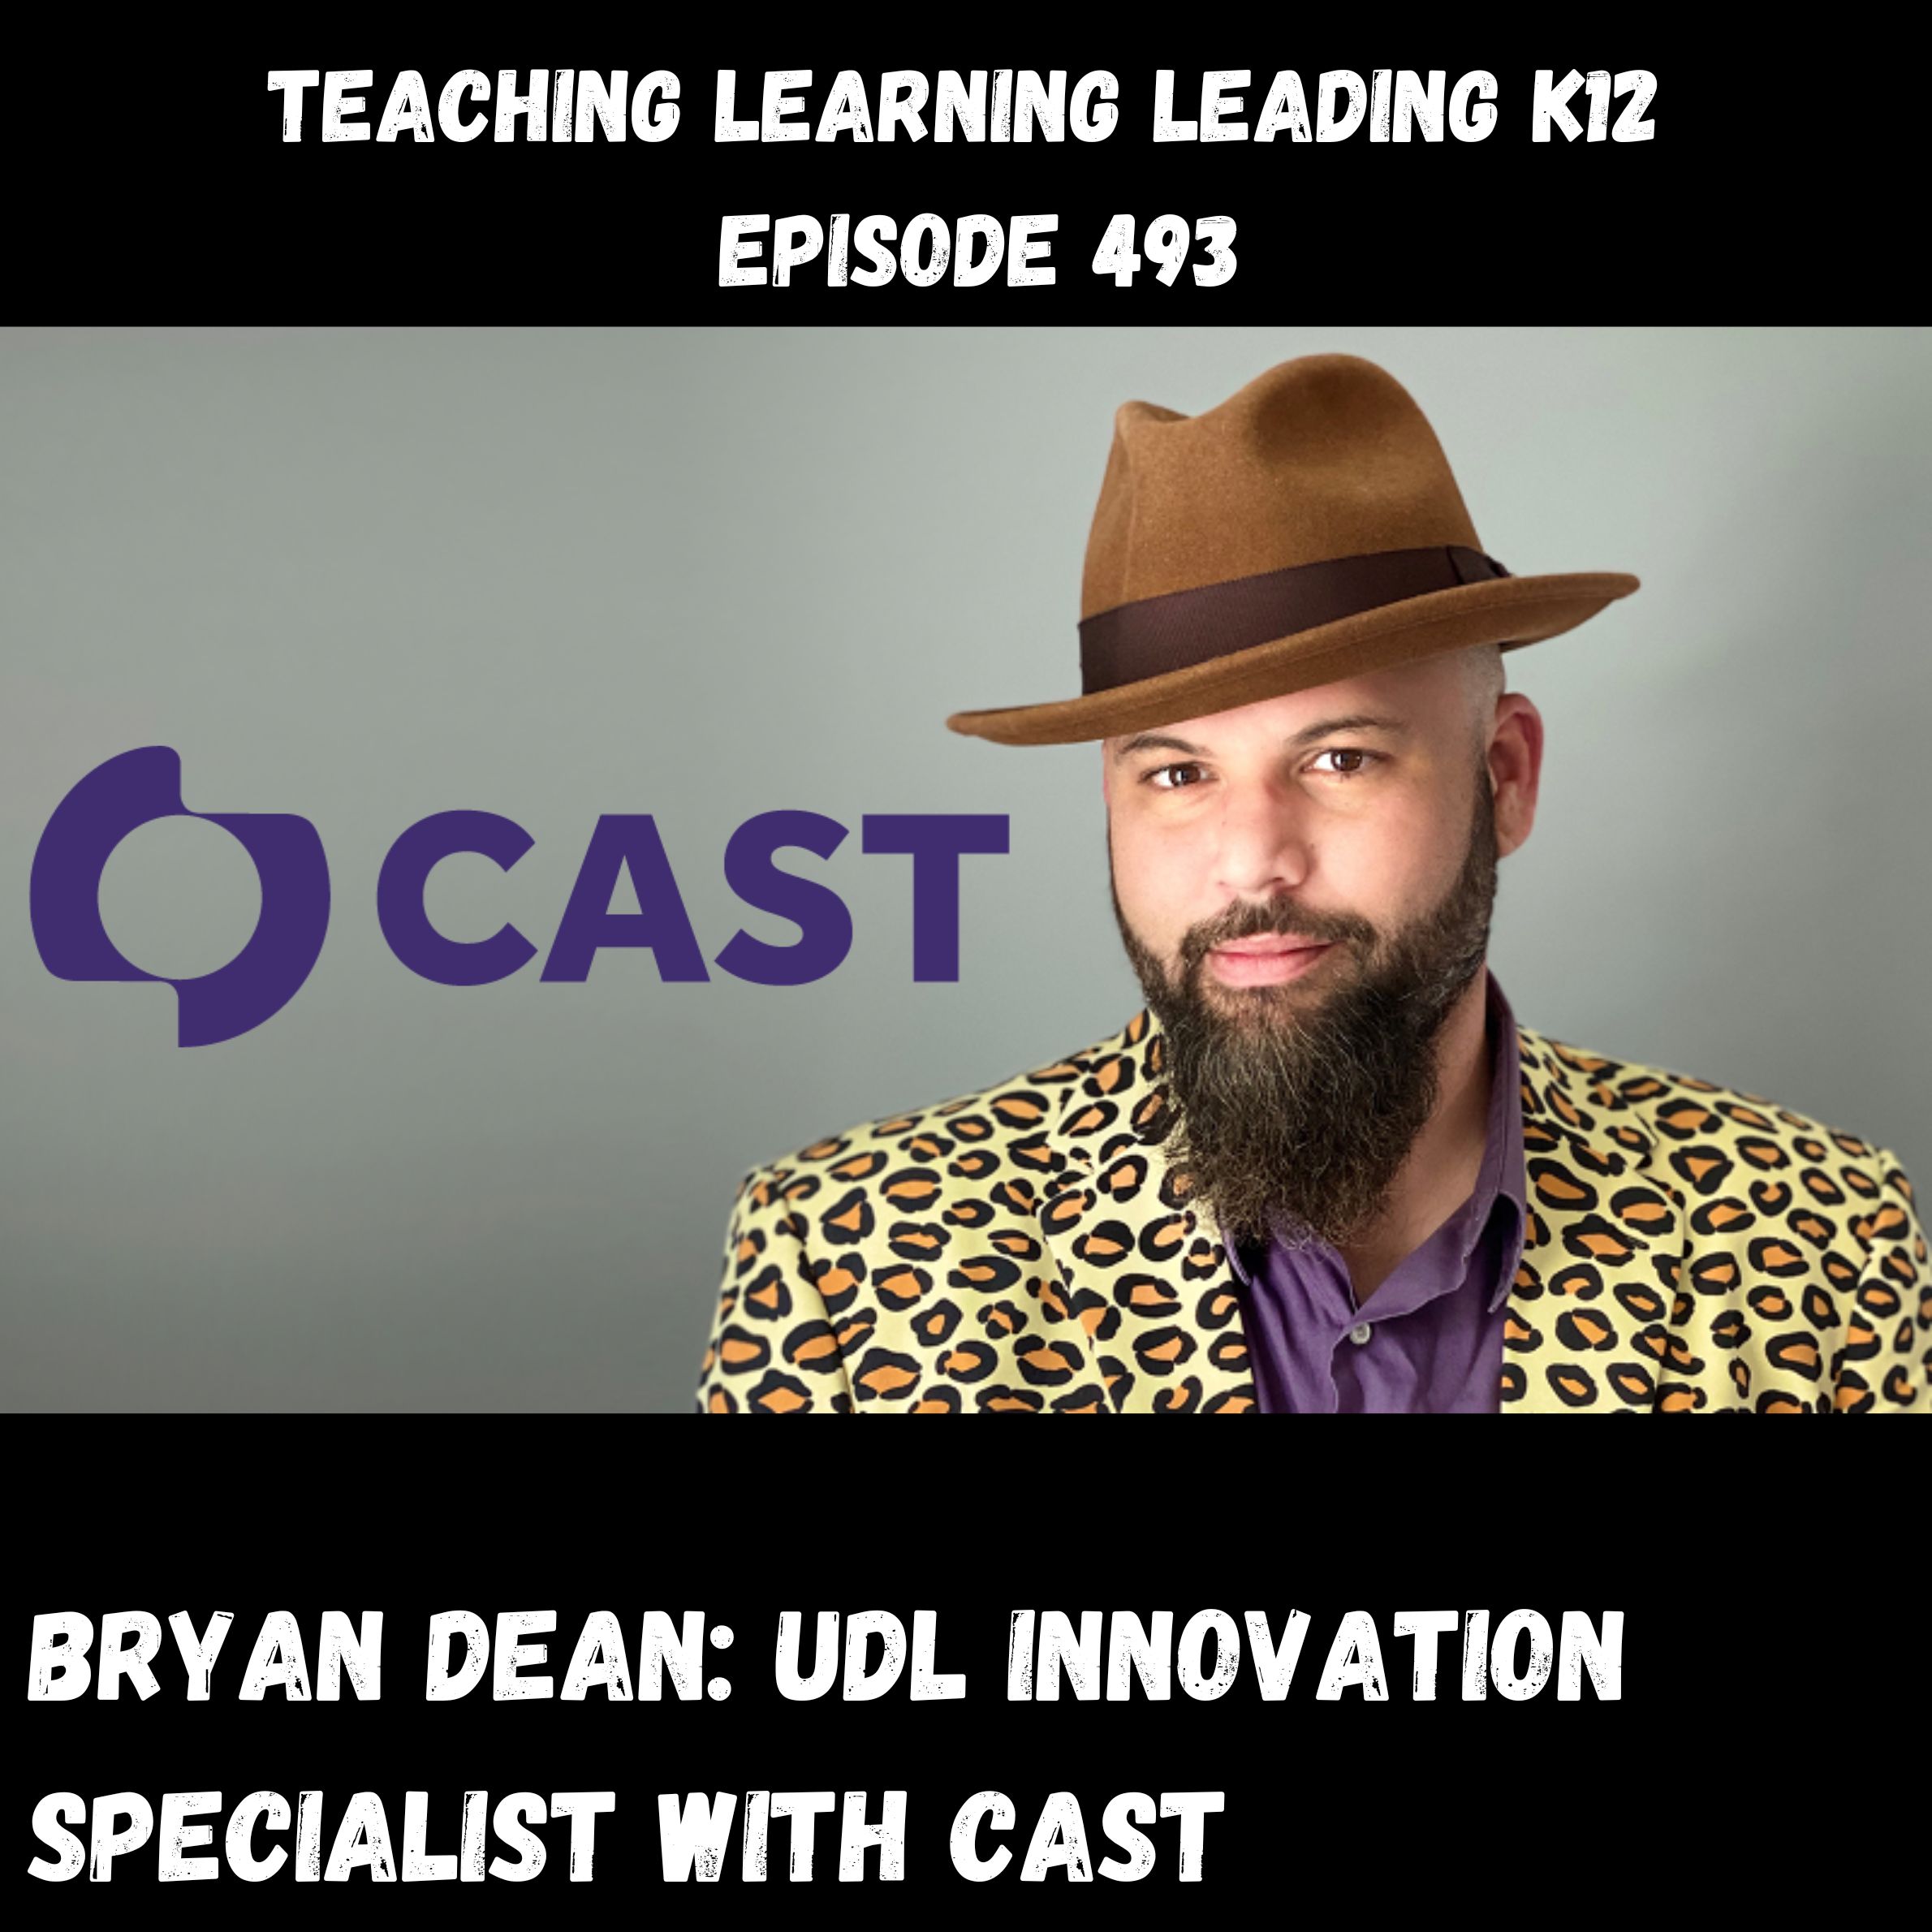 Bryan Dean: UDL Innovation Specialist with CAST - 493